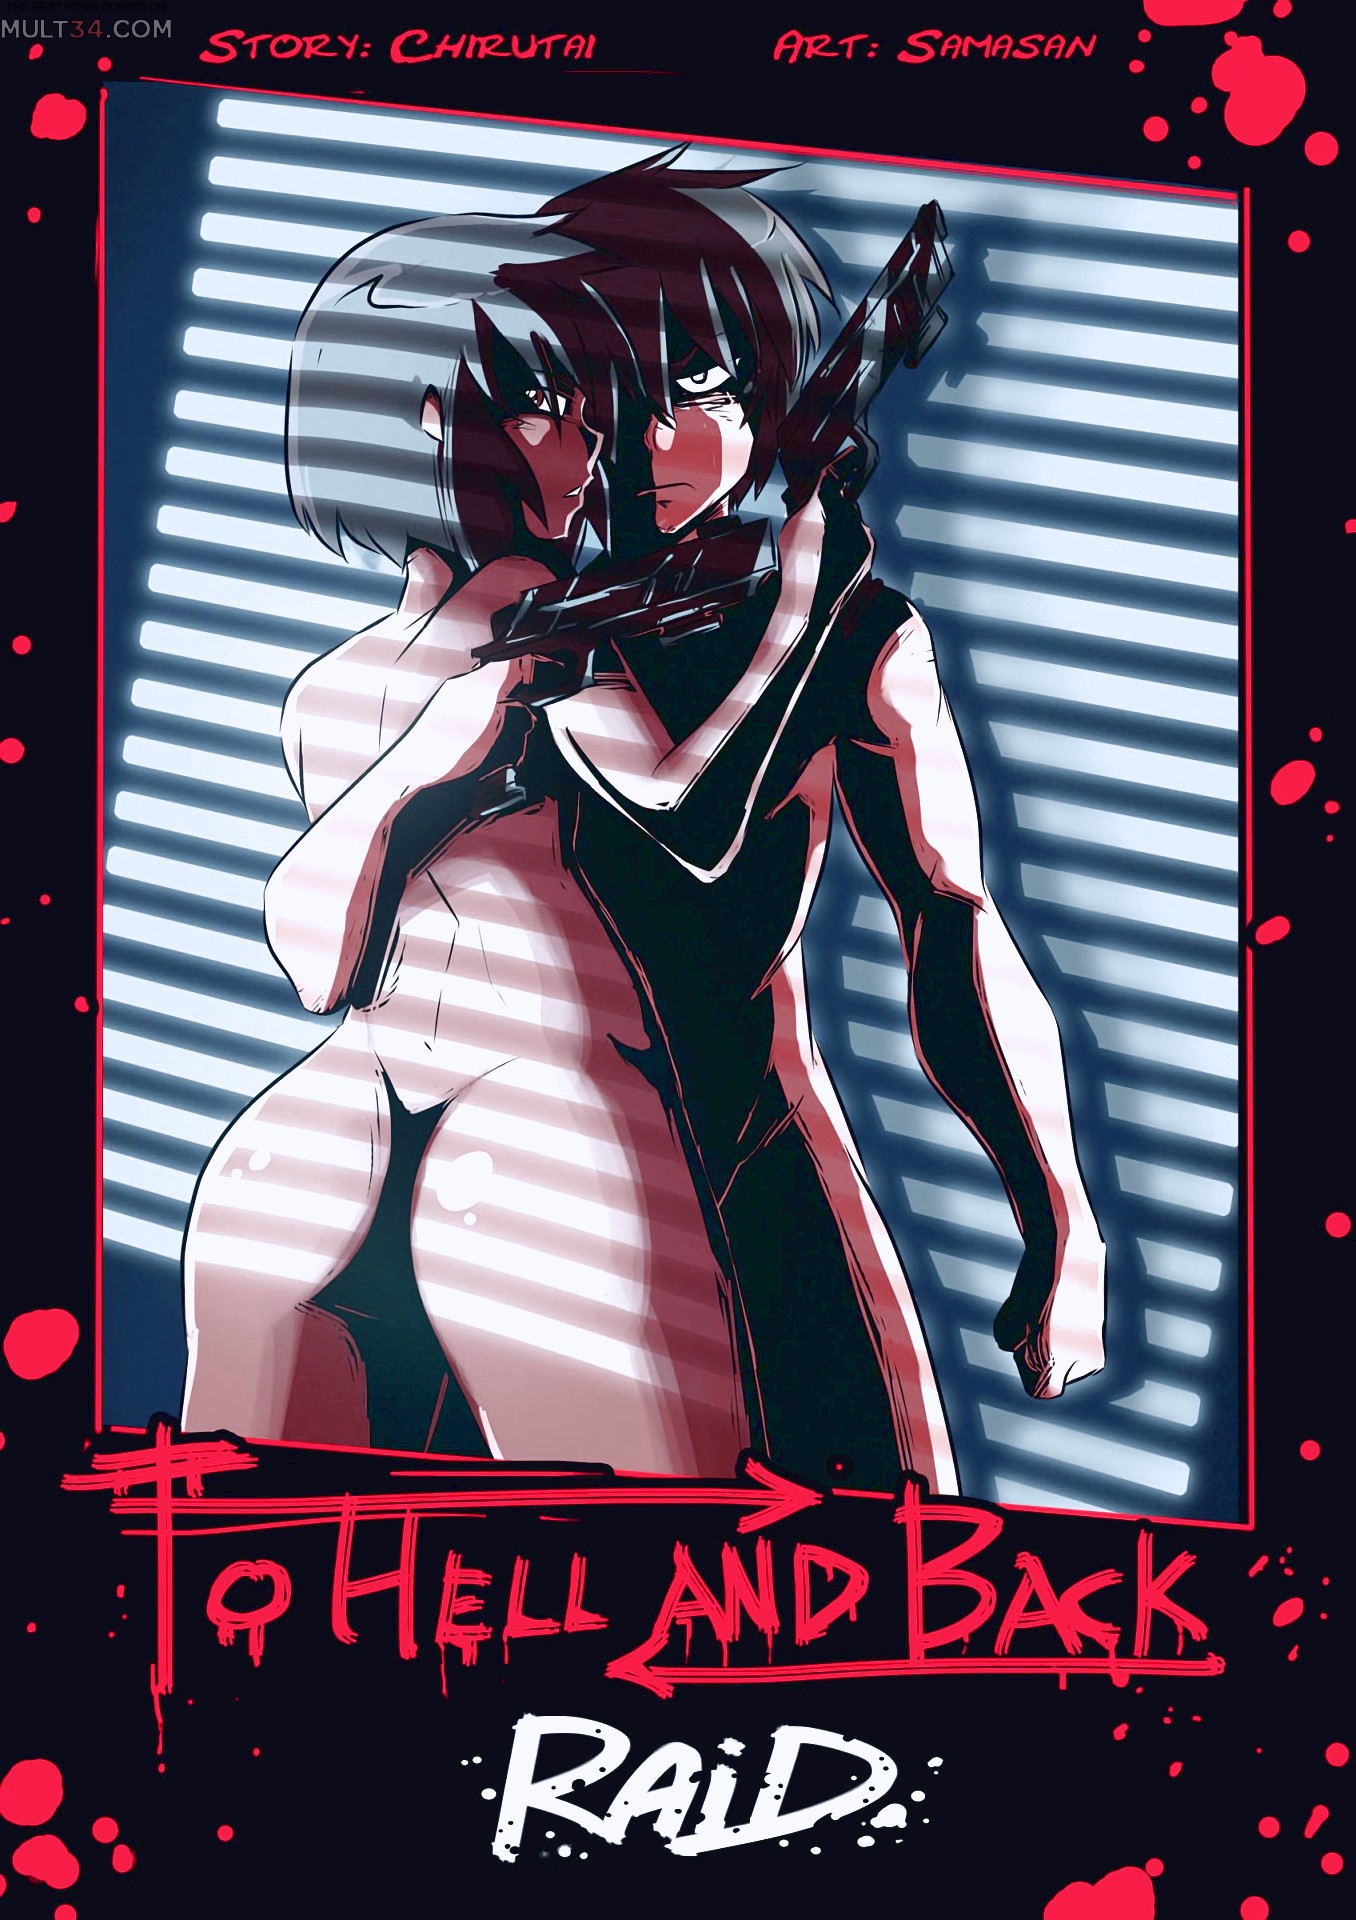 To Hell and Back: RAID porn comic - the best cartoon porn comics, Rule 34 |  MULT34